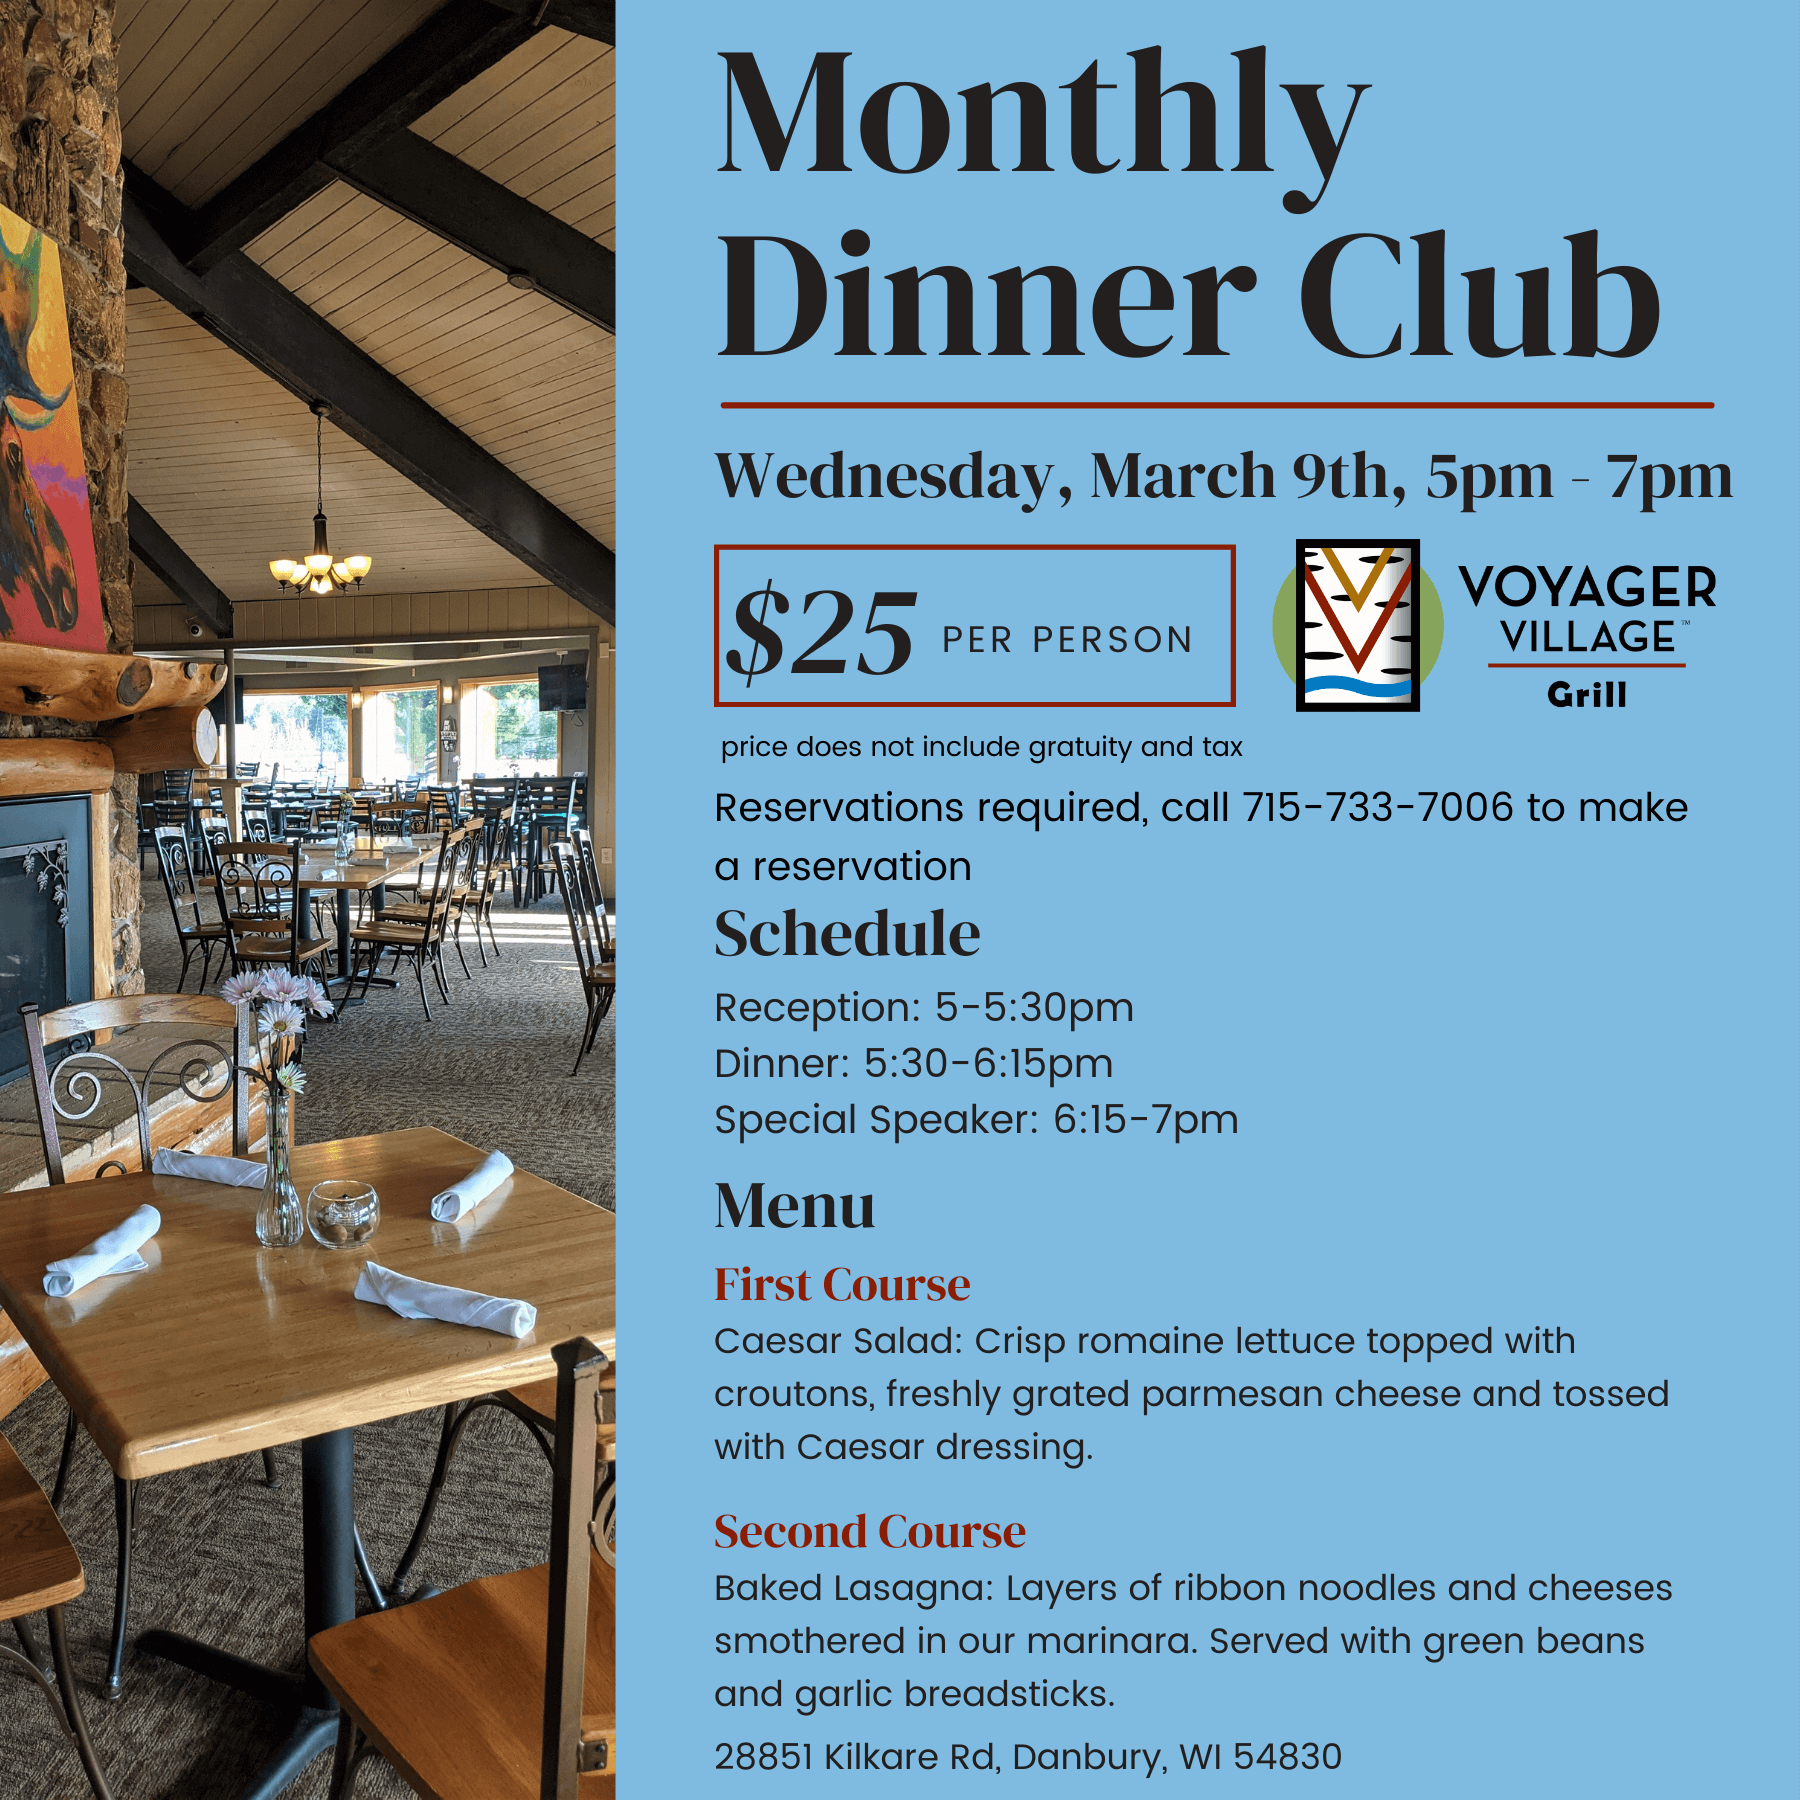 Enjoy our first installment of our new monthly dinner club, taking place on Wednesday, March 9th from 5pm to 7pm. Enjoy a two-course lasagna dinner and a special speaker after. The cost is $25 per person, reservations are required. Call 715-733-7006 to make a reservation.